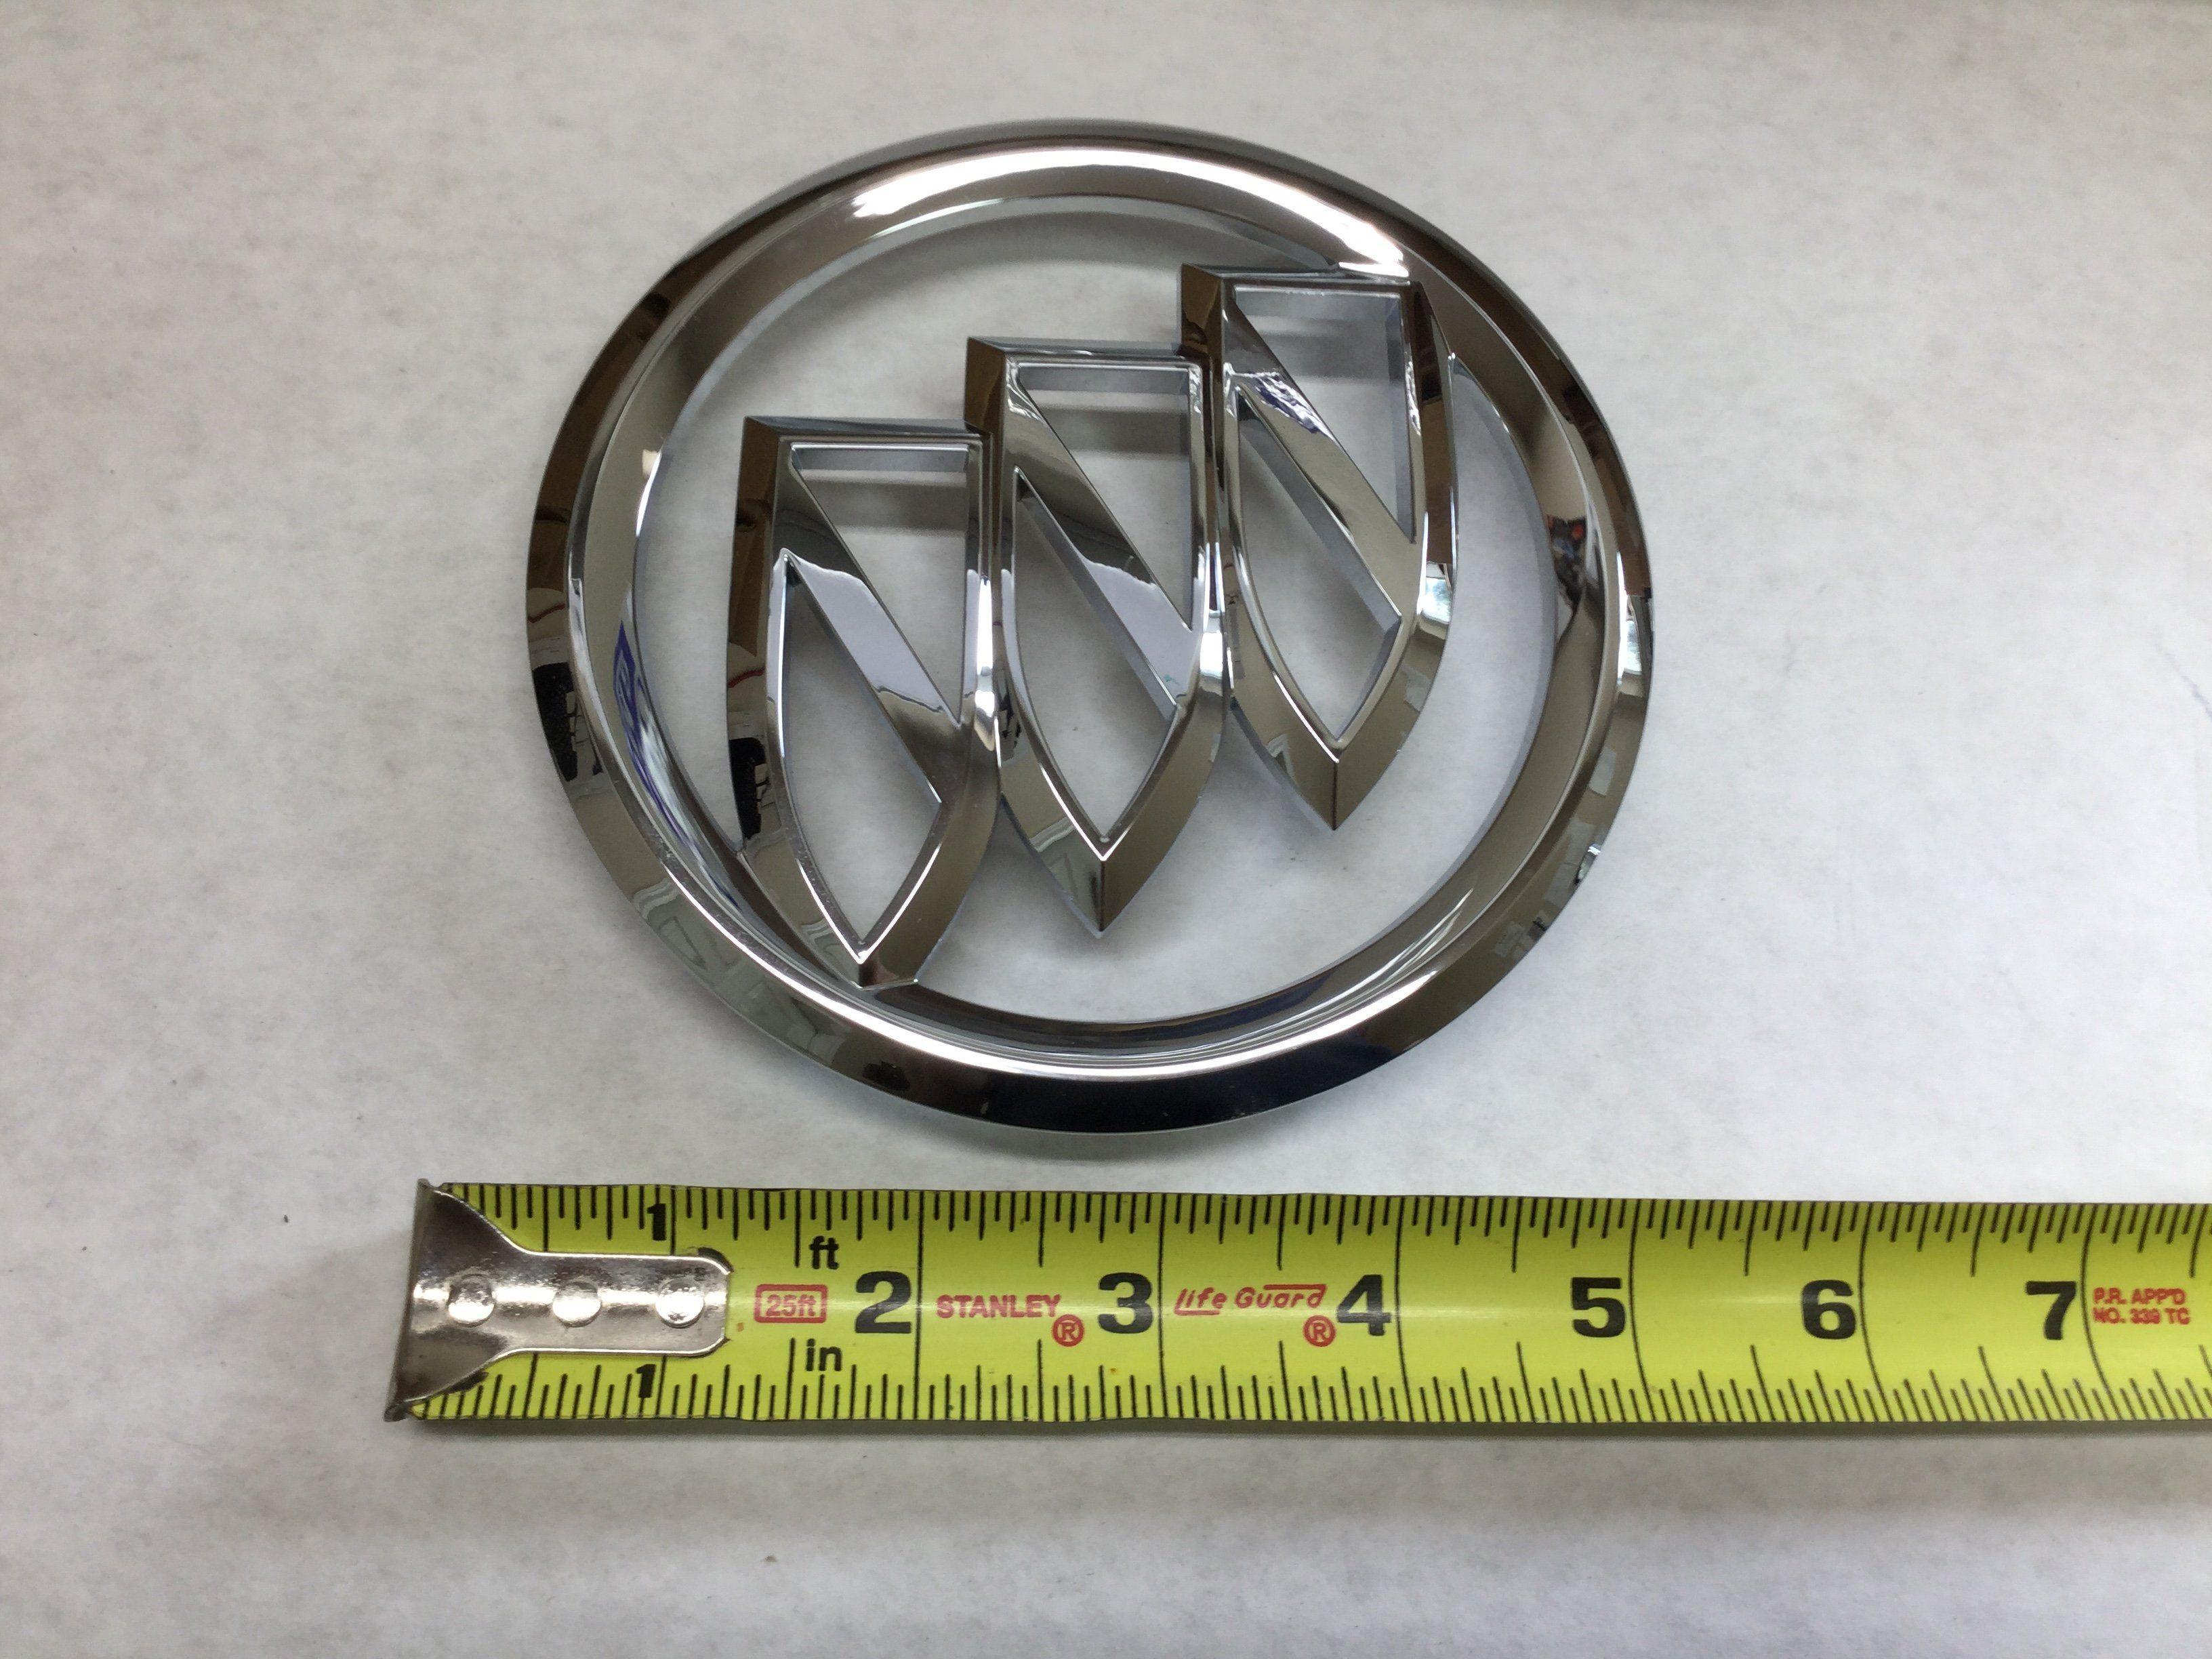 2014 Buick Logo - New 2006 2009 Buick Lucerne Or Lacrosse Front Grill Emblem Genuine